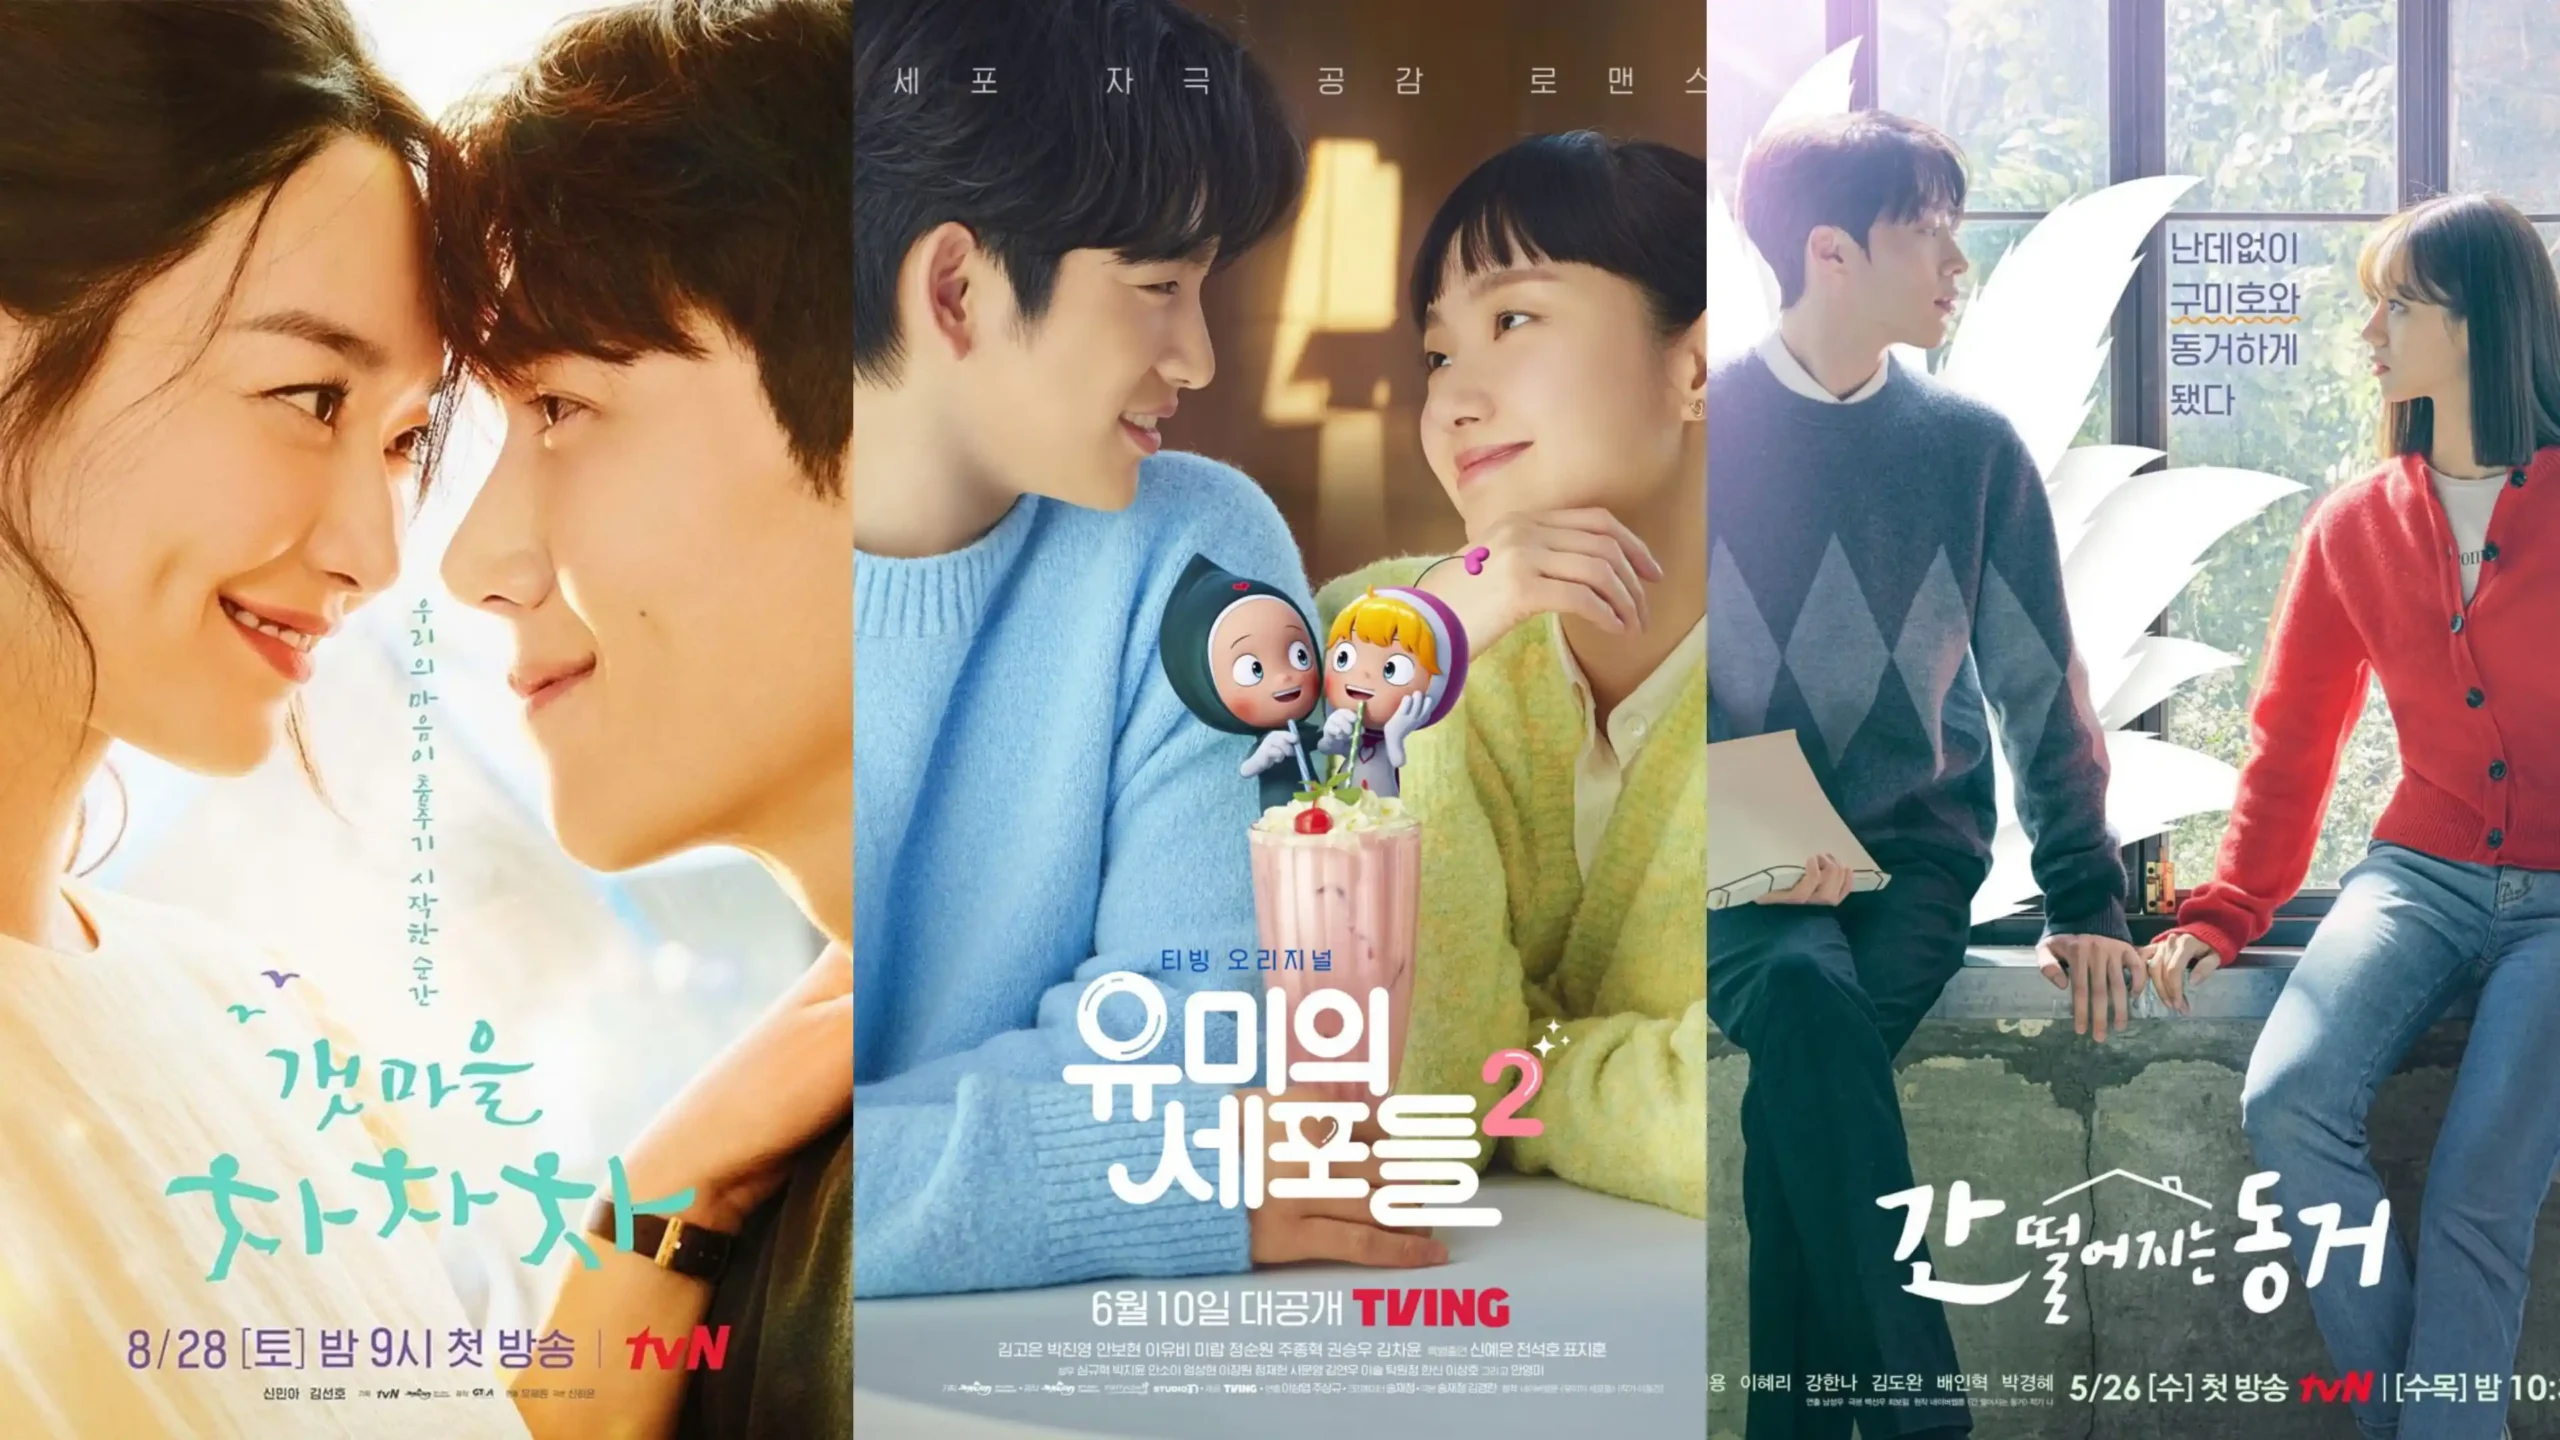 Best feel good Korean dramas to watch scaled